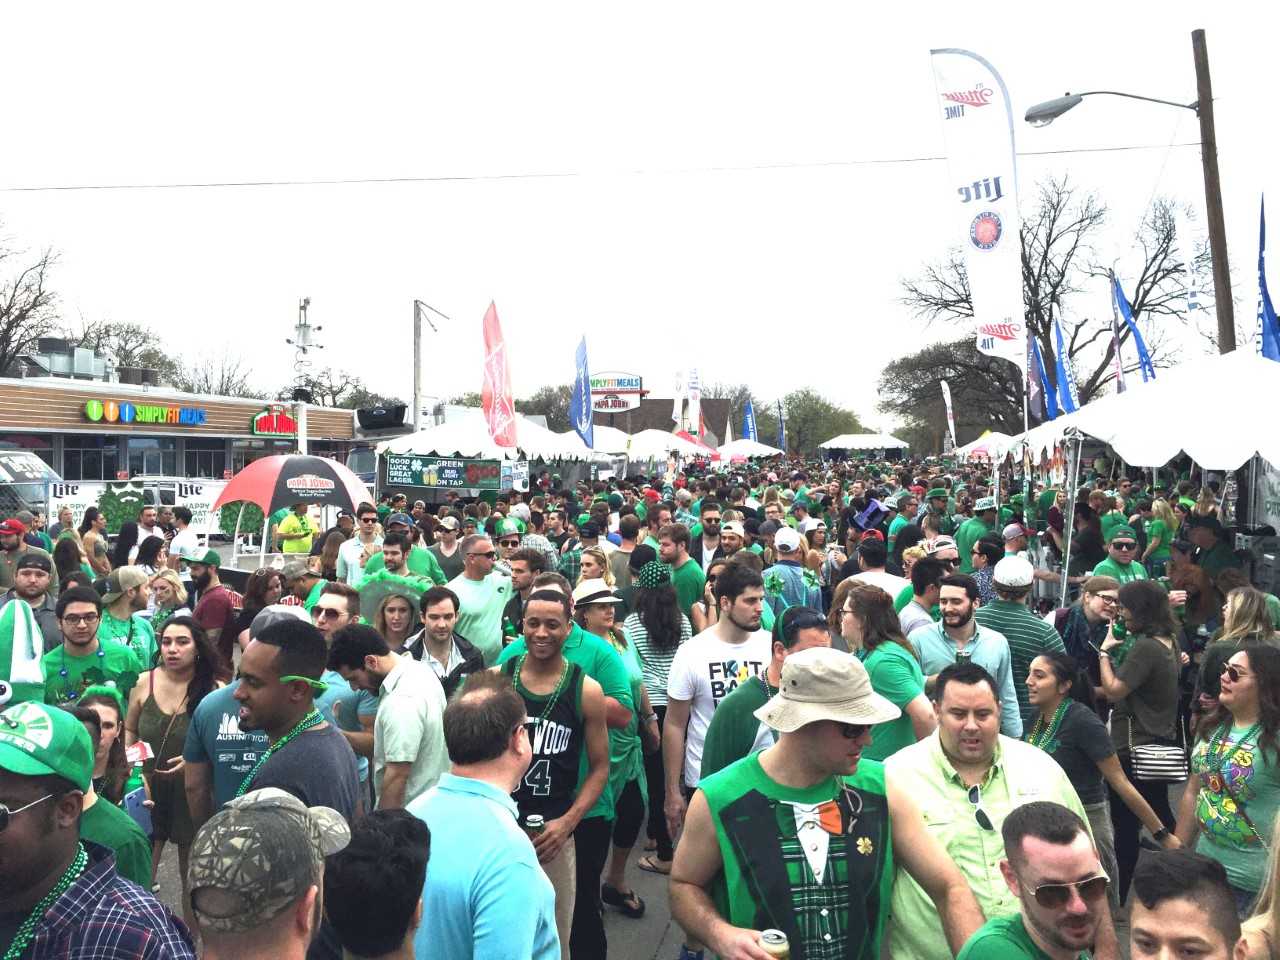 wfaa.com | 8 things to know about Dallas St. Patrick's Day Parade1280 x 960